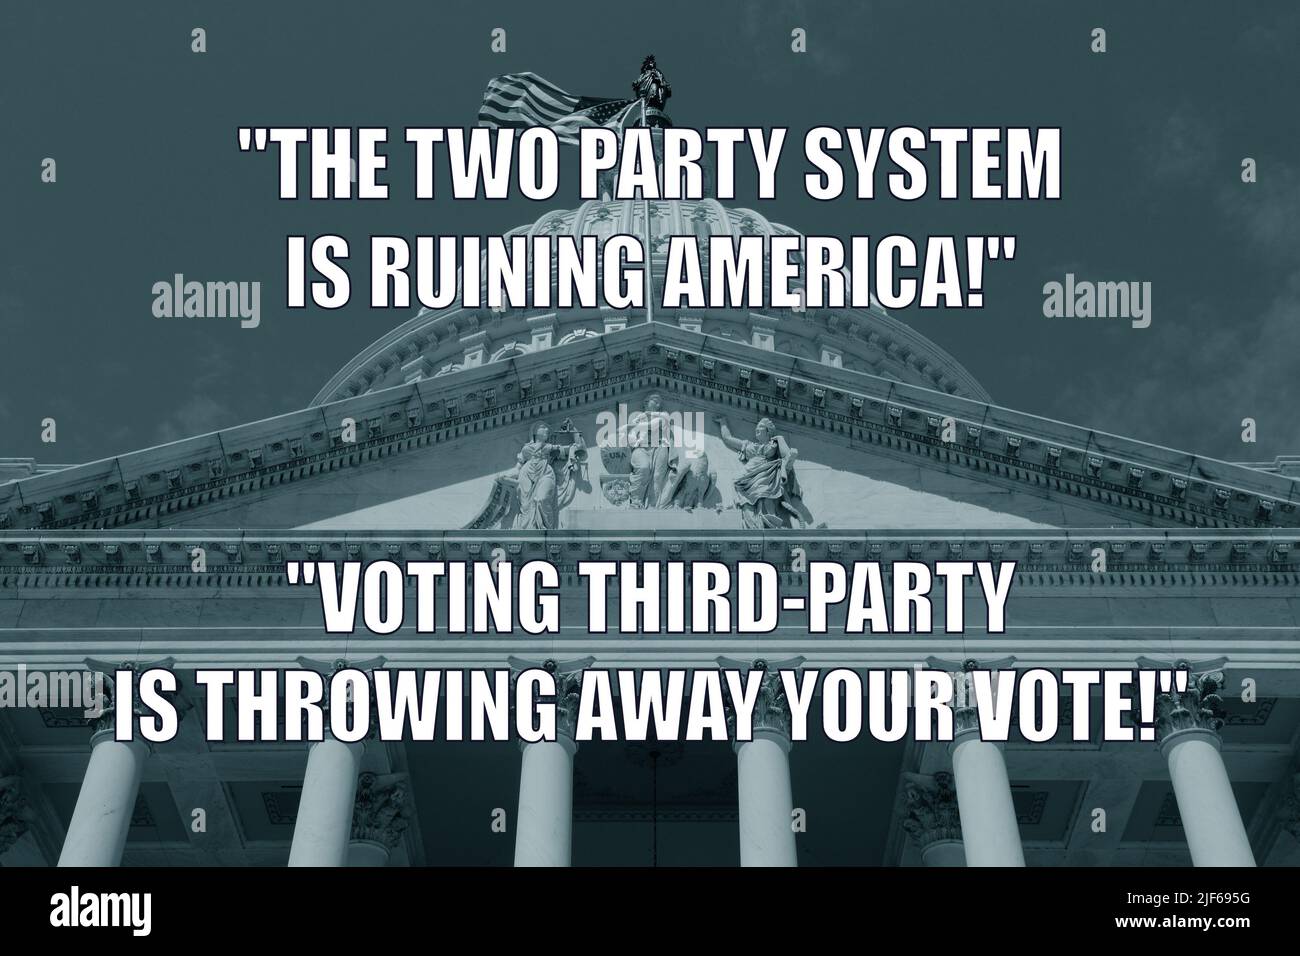 Two party system. US political system funny meme for social media sharing. Humor about third party voting in American midterm elections. Stock Photo